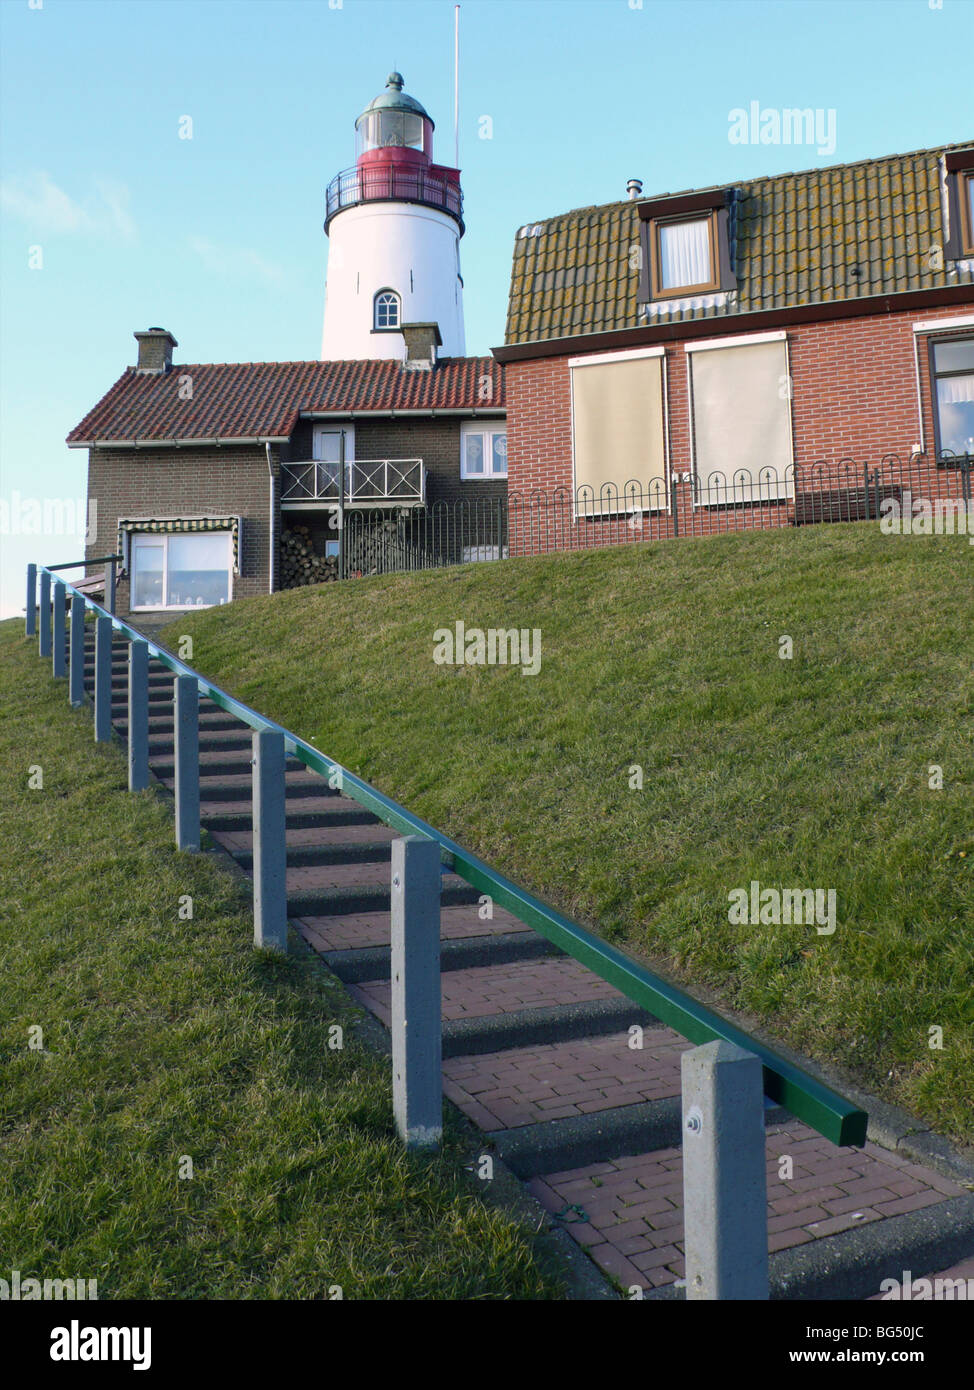 Urk, small village in The netherlands Stock Photo